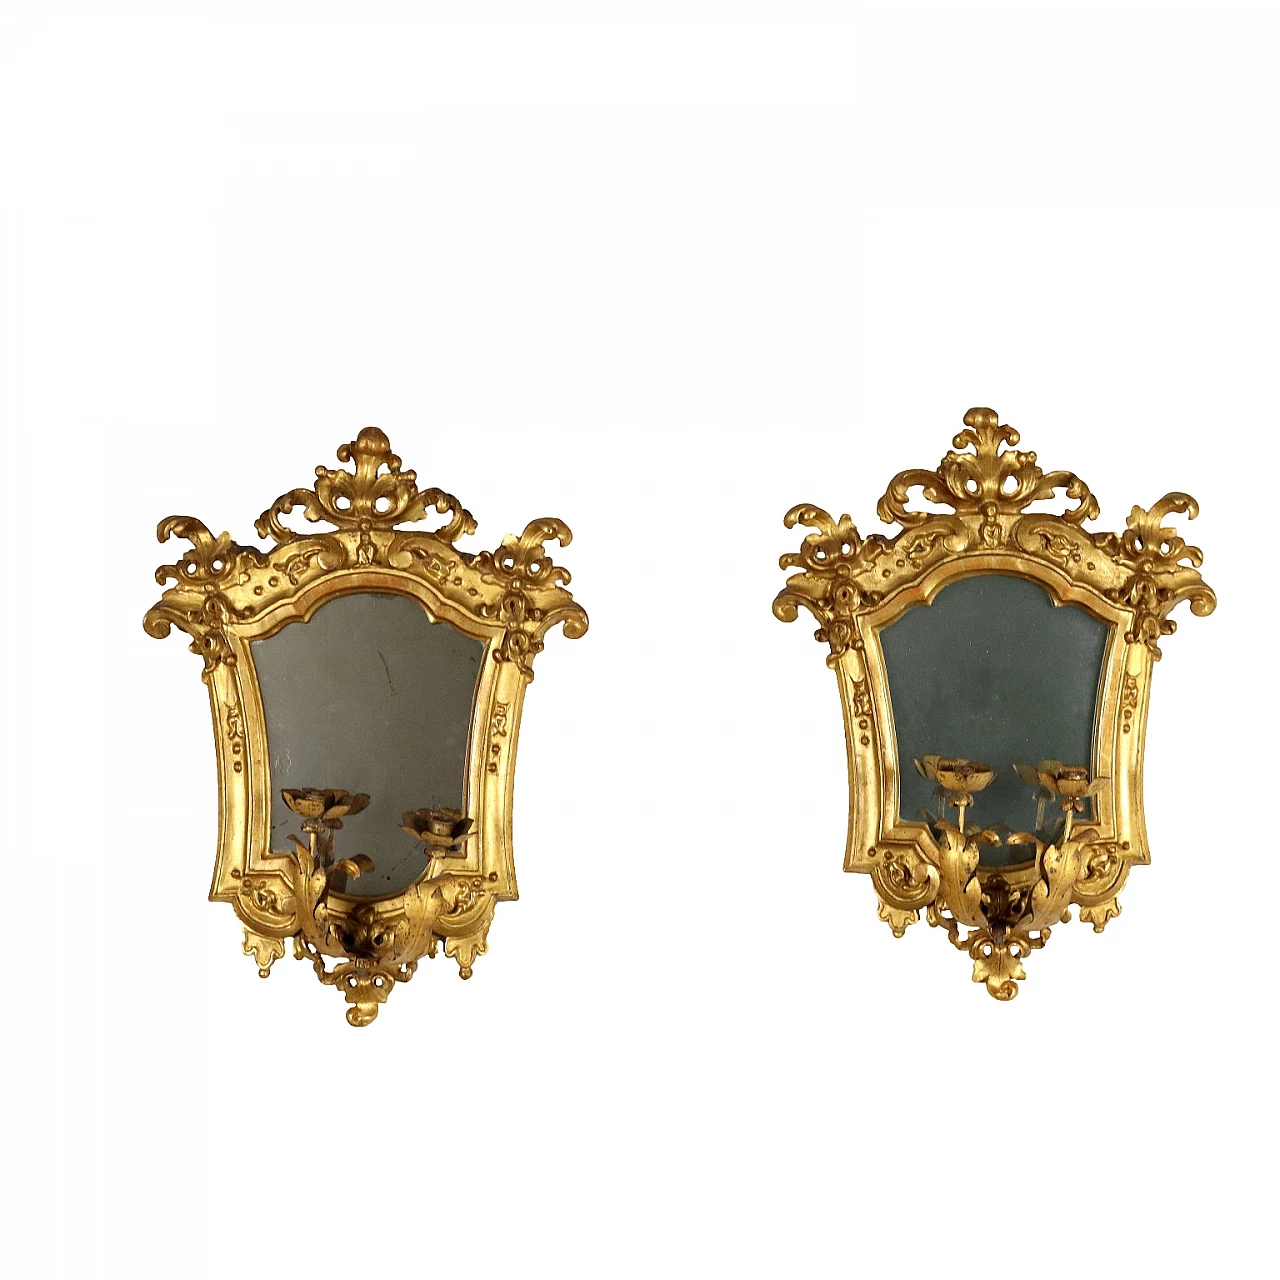 Pair of Baroque embossed sheet metal mirrors with lamp-holding arms, early 18th century 1